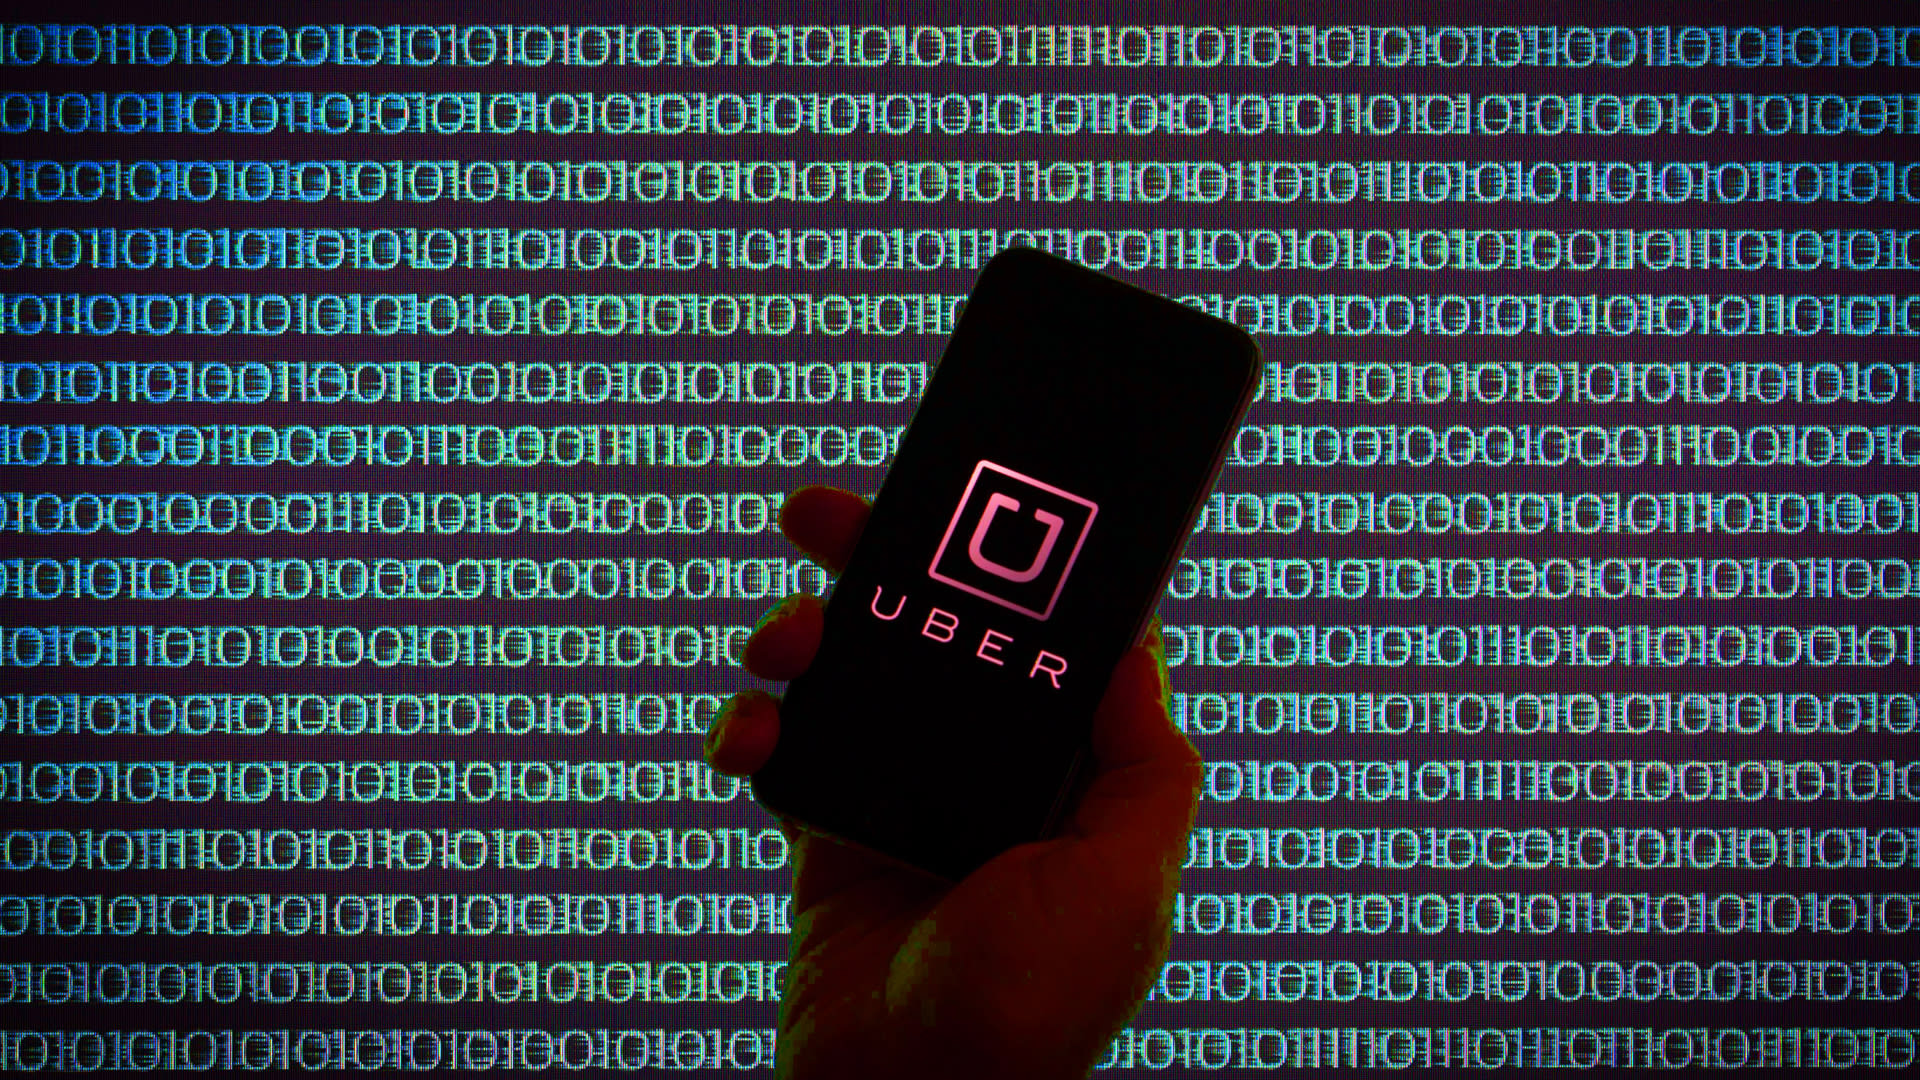 Regulators around the world are investigating Uber after data breach coverup